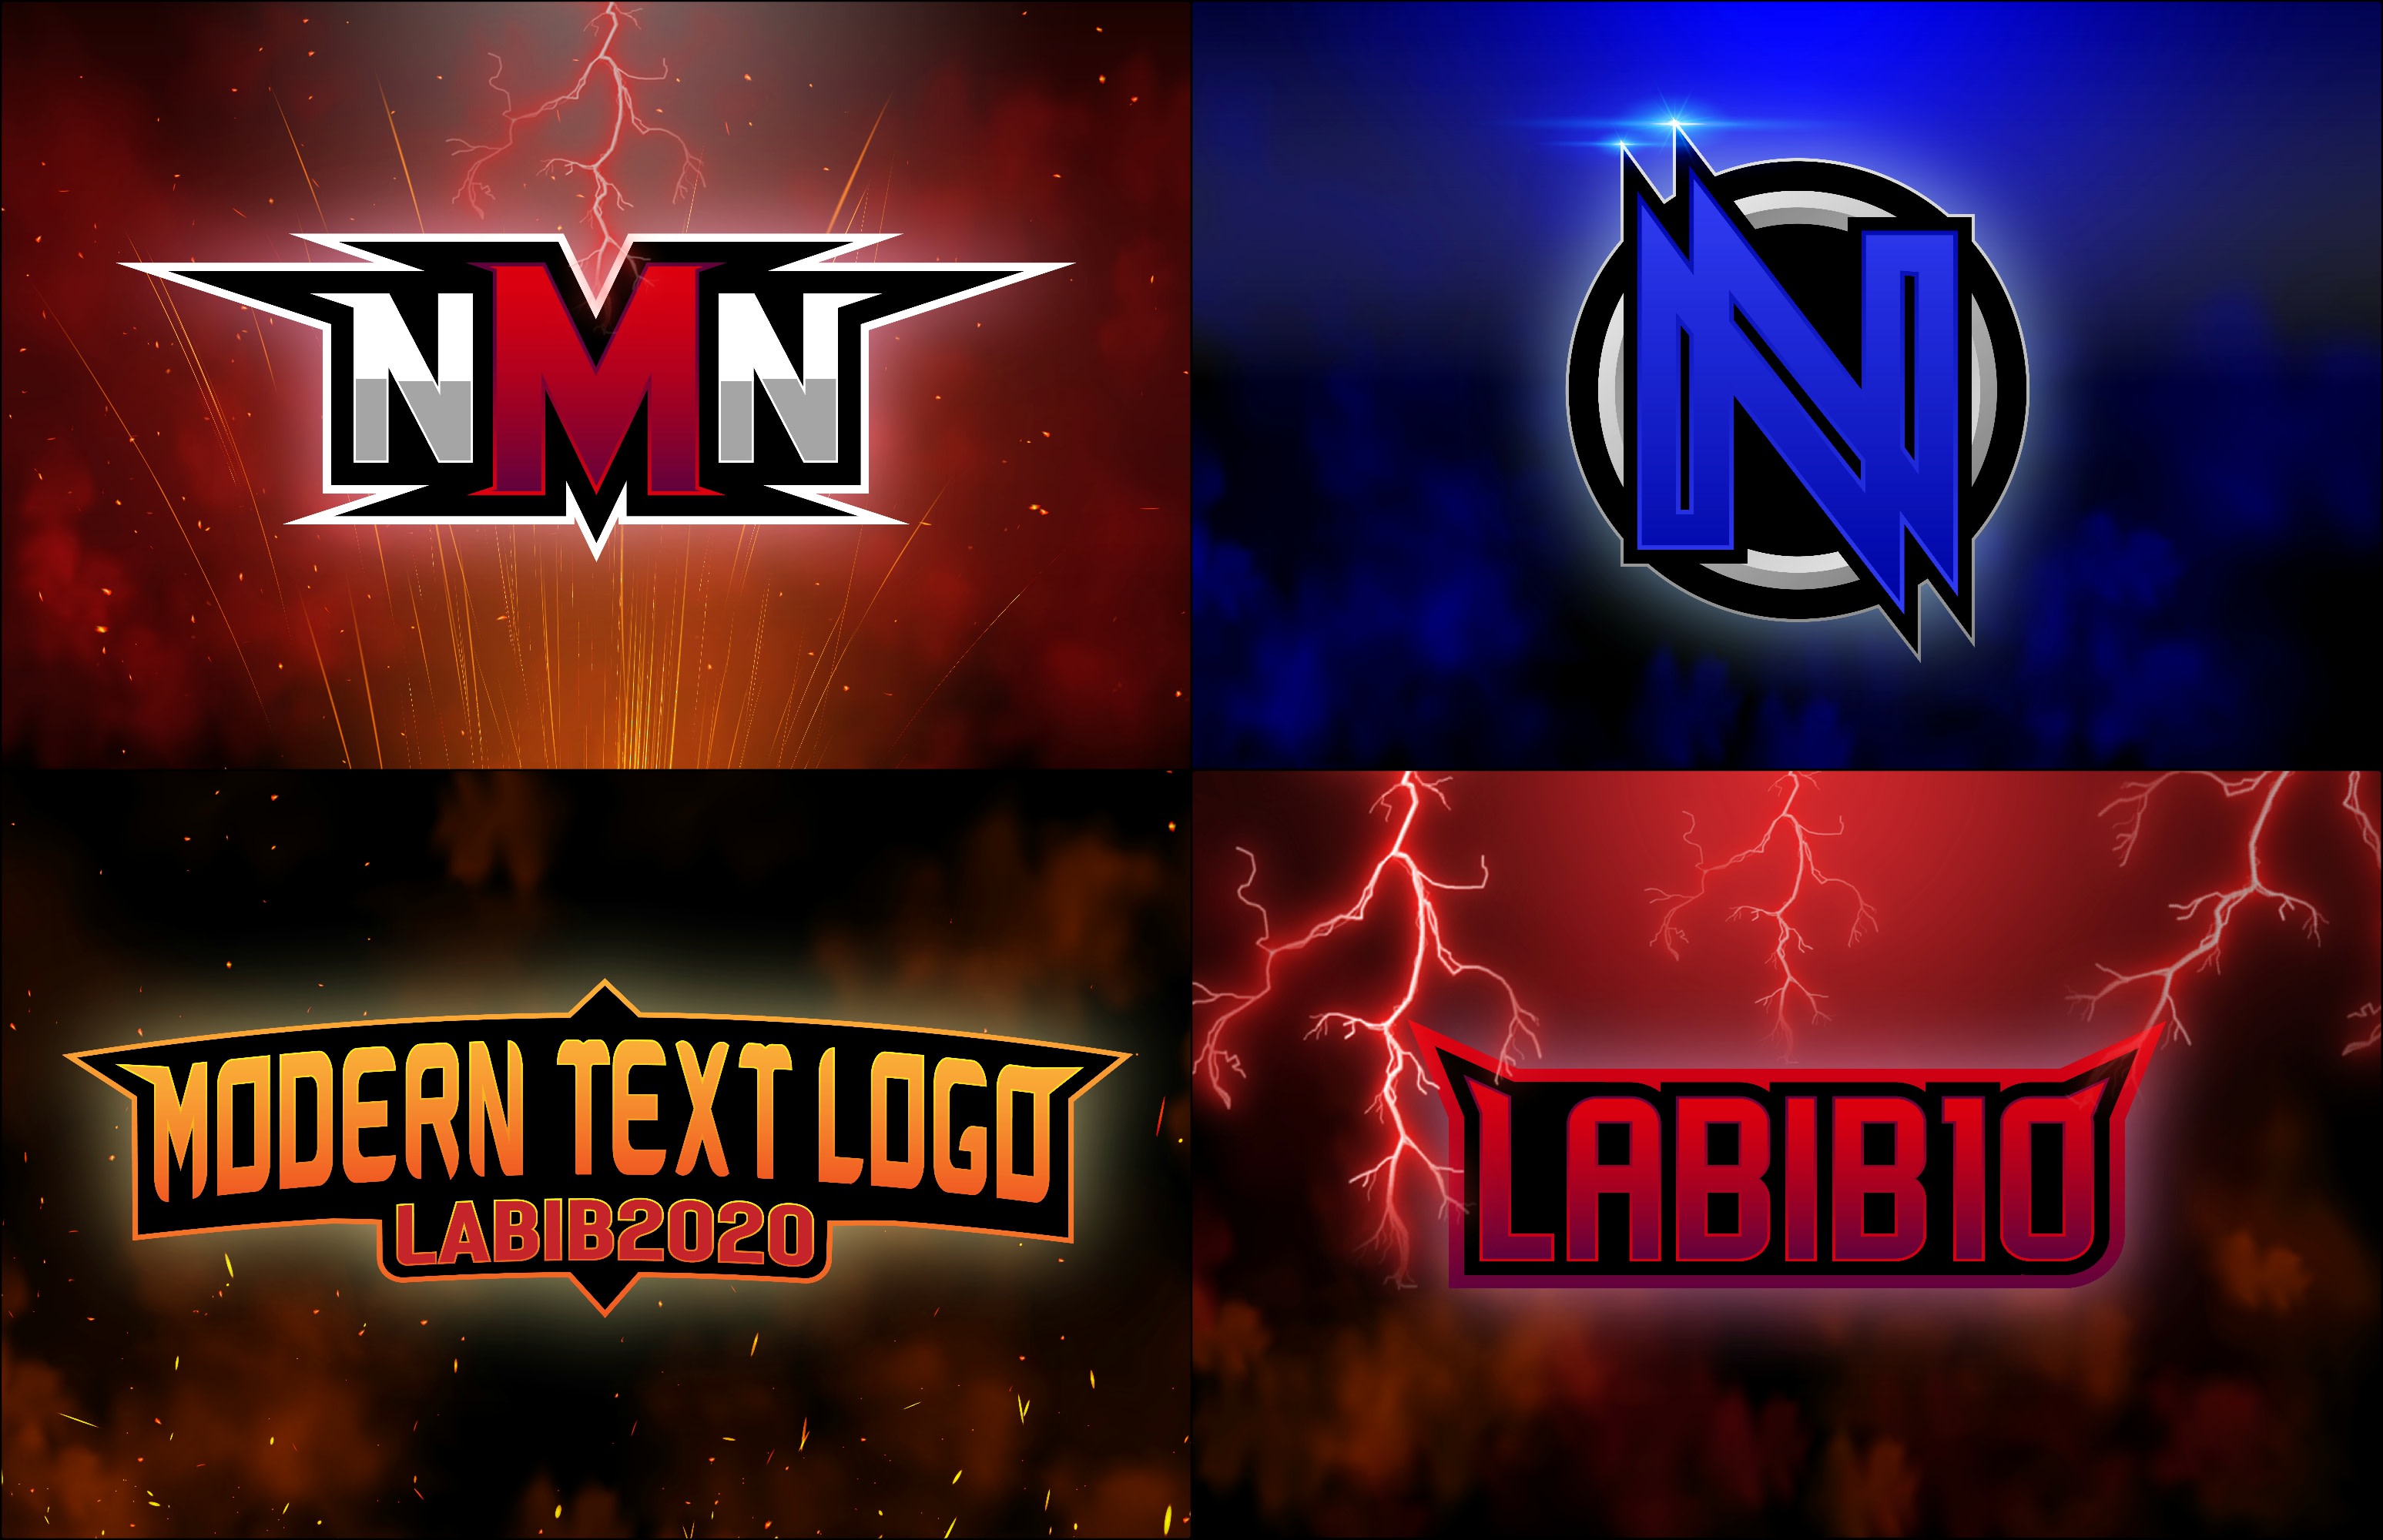 Design clean logo for esports,twitch,gaming,team,name,etc by ...